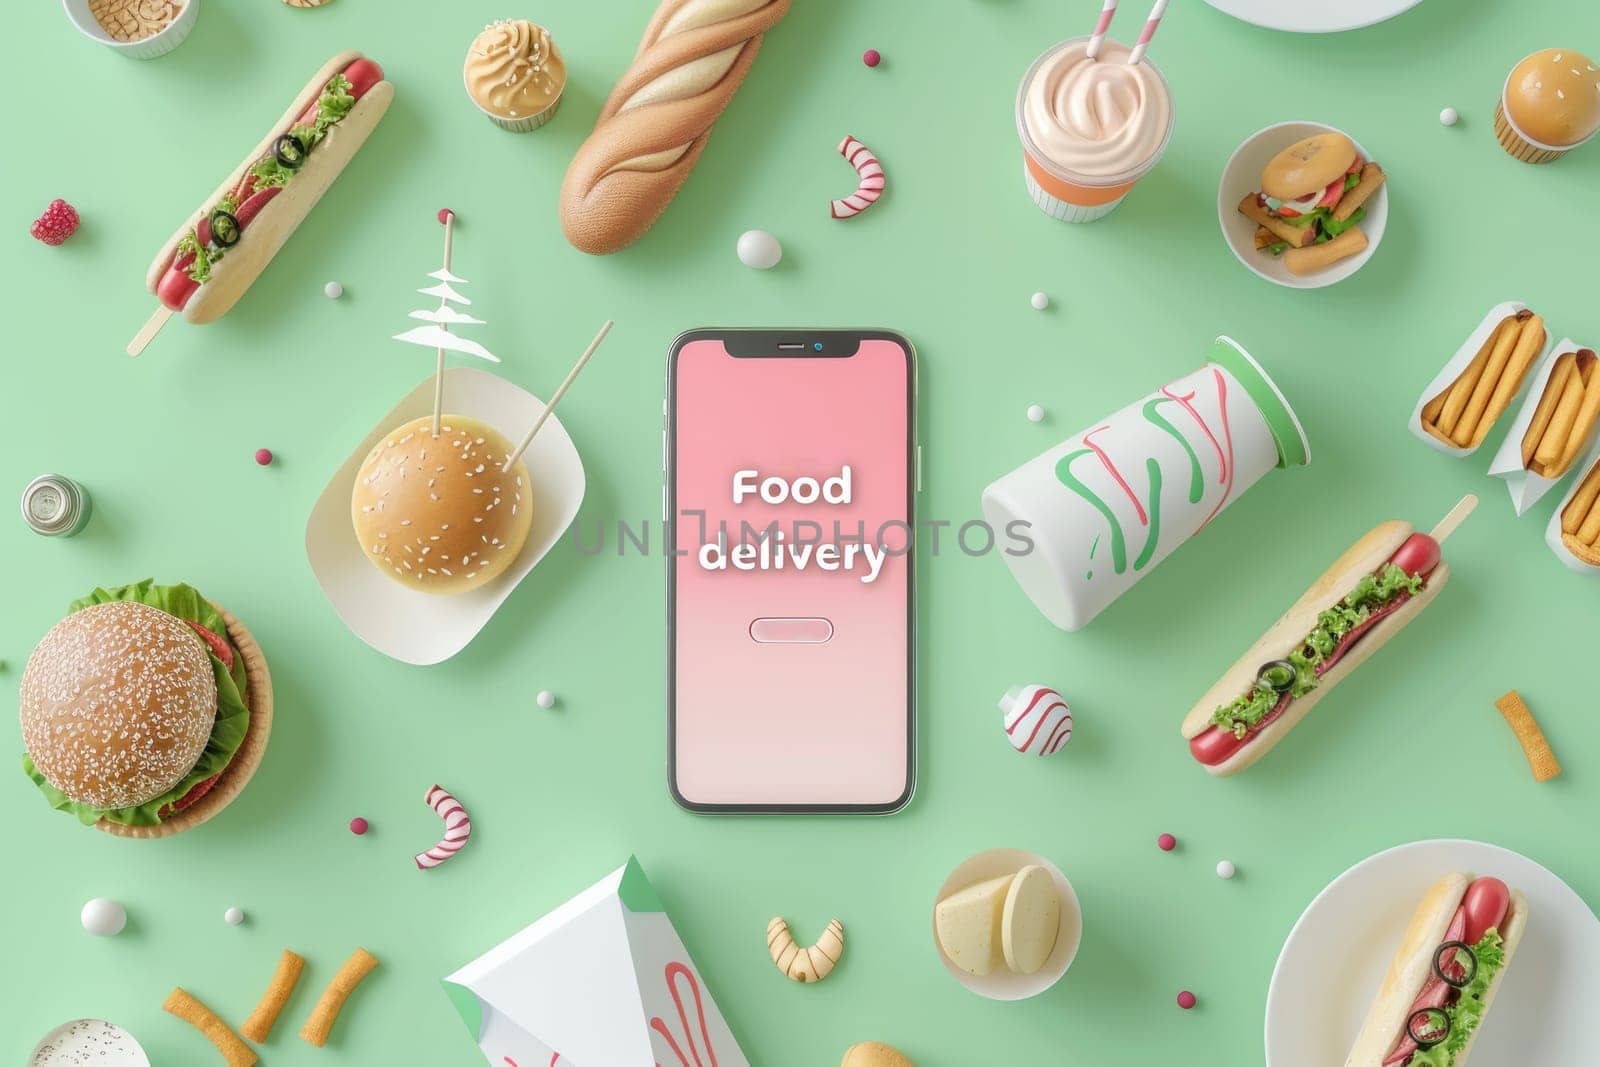 A food delivery app is shown on a green background with a variety of food items.